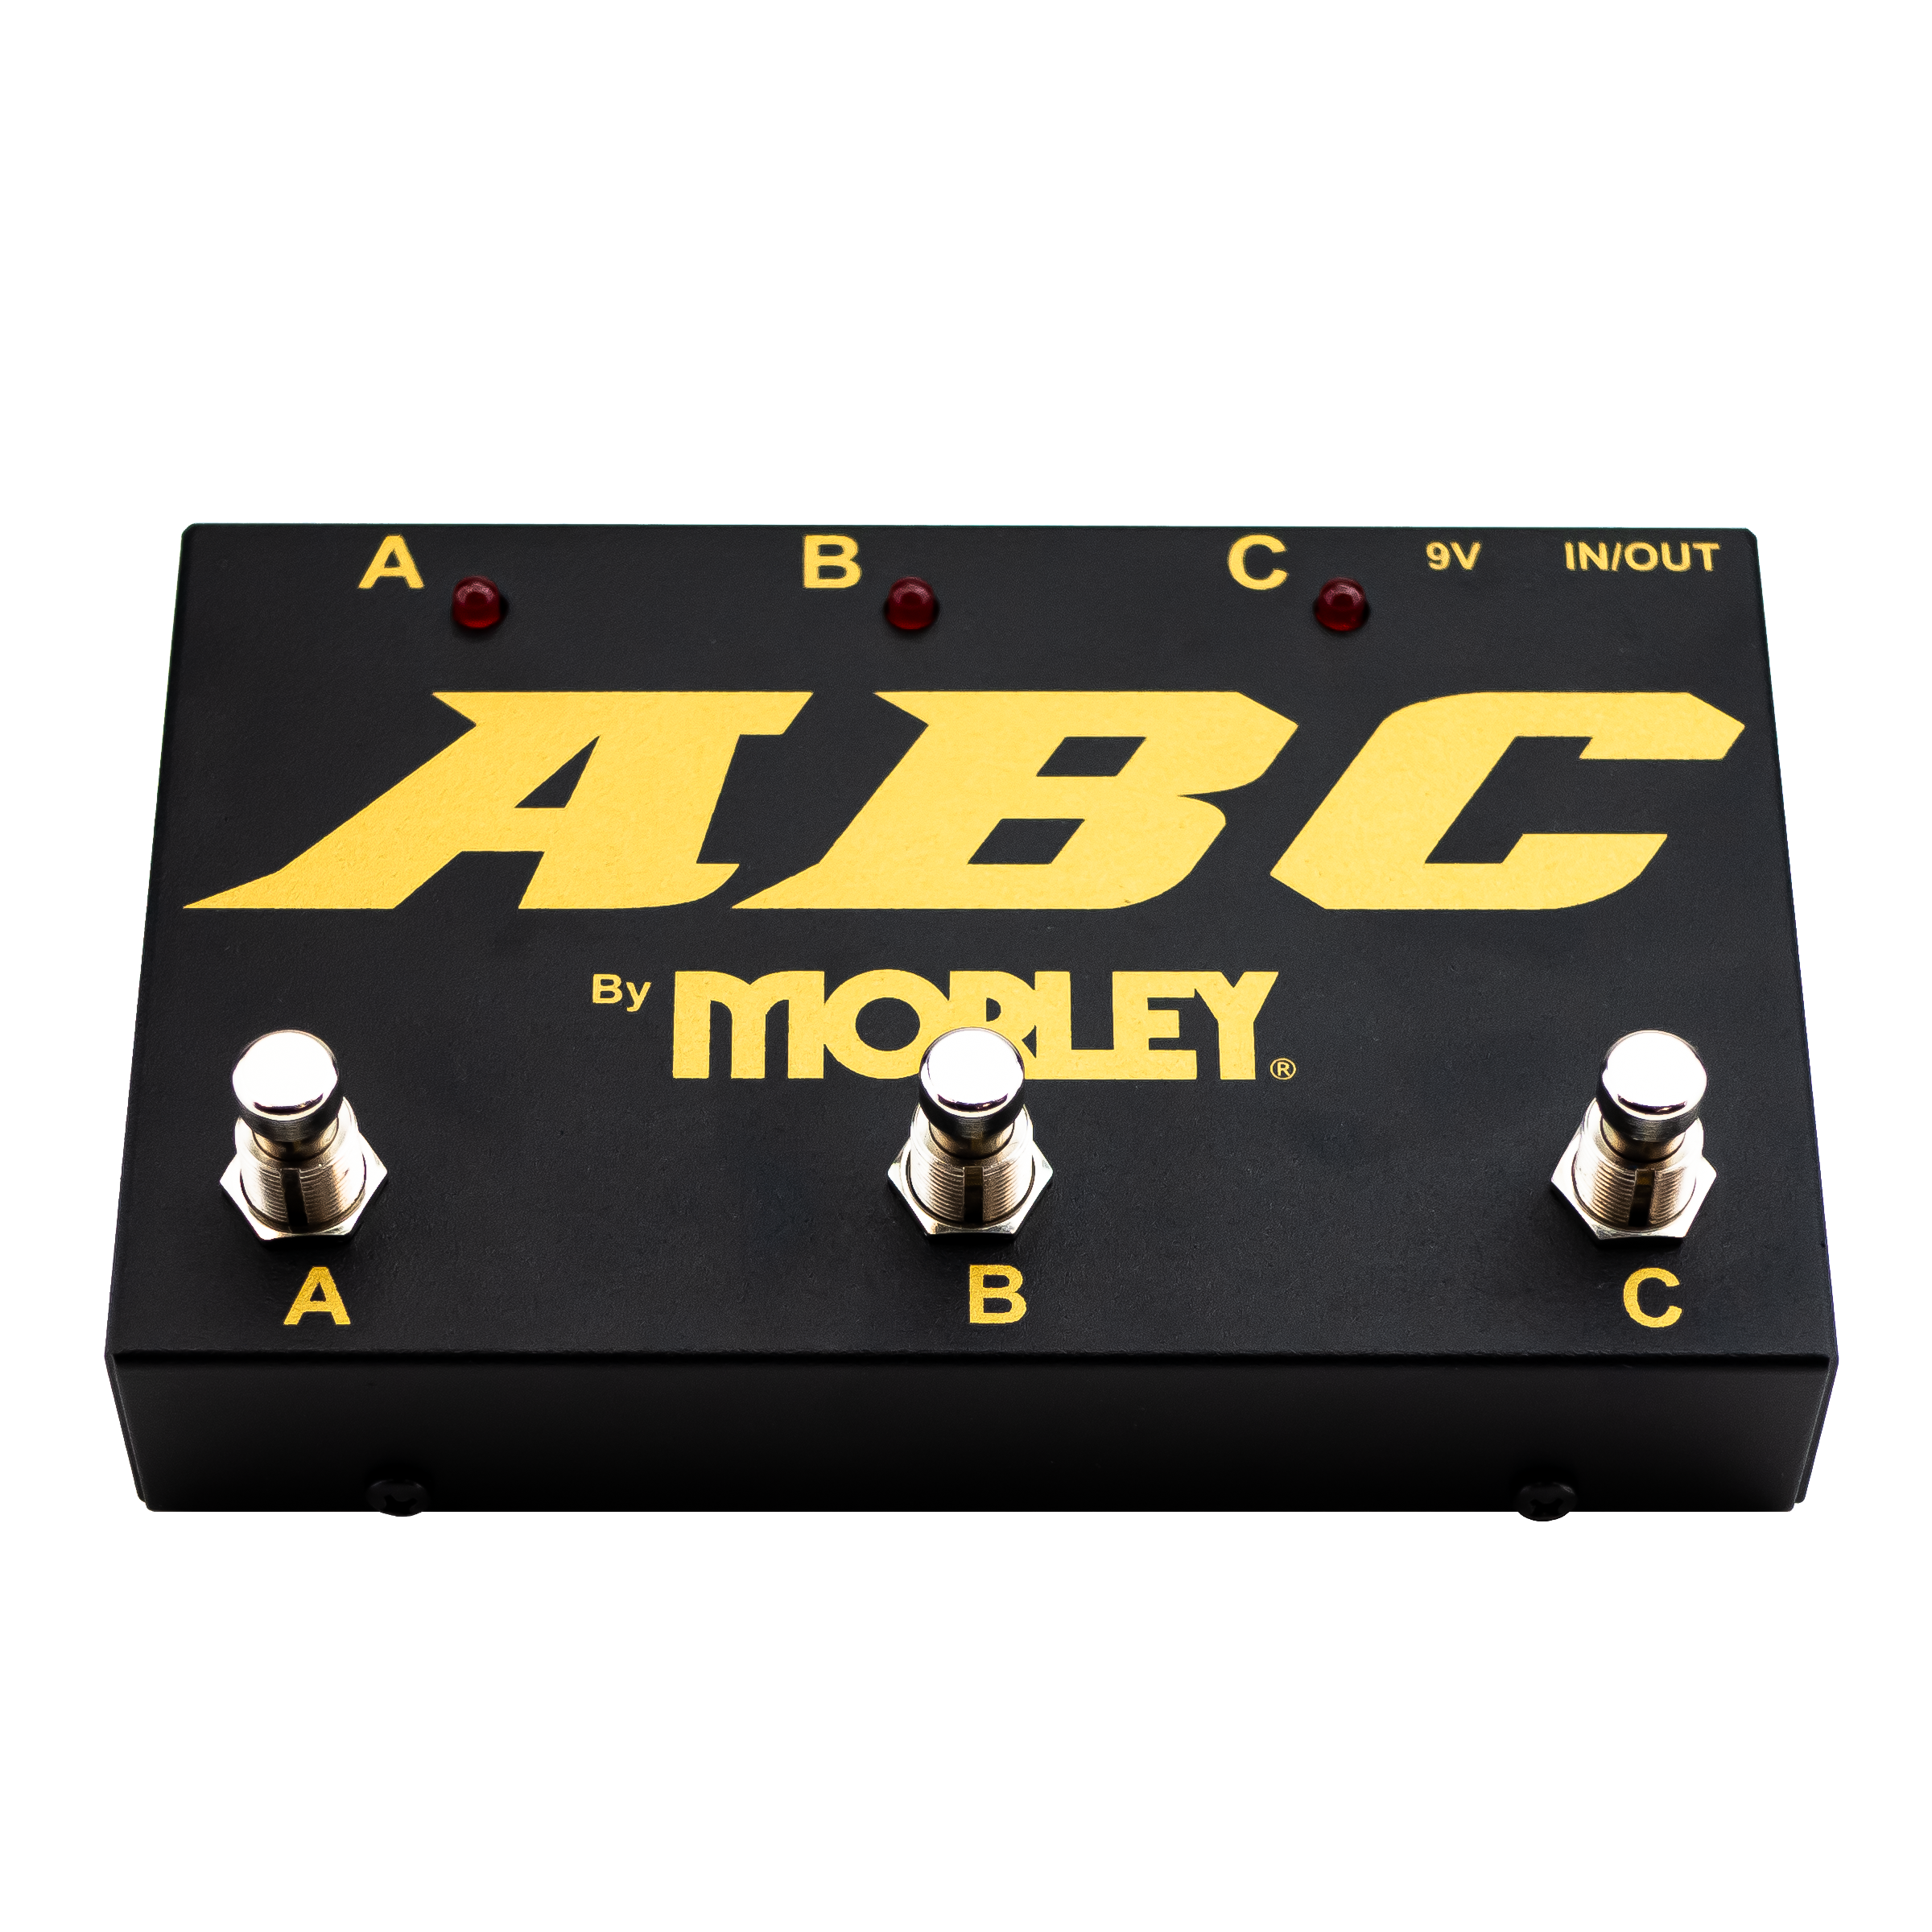 Morley Abc Gold Series Switcher 1 Vers 3 Ou 3 Vers 1 - Footswitch & Commande Divers - Variation 2